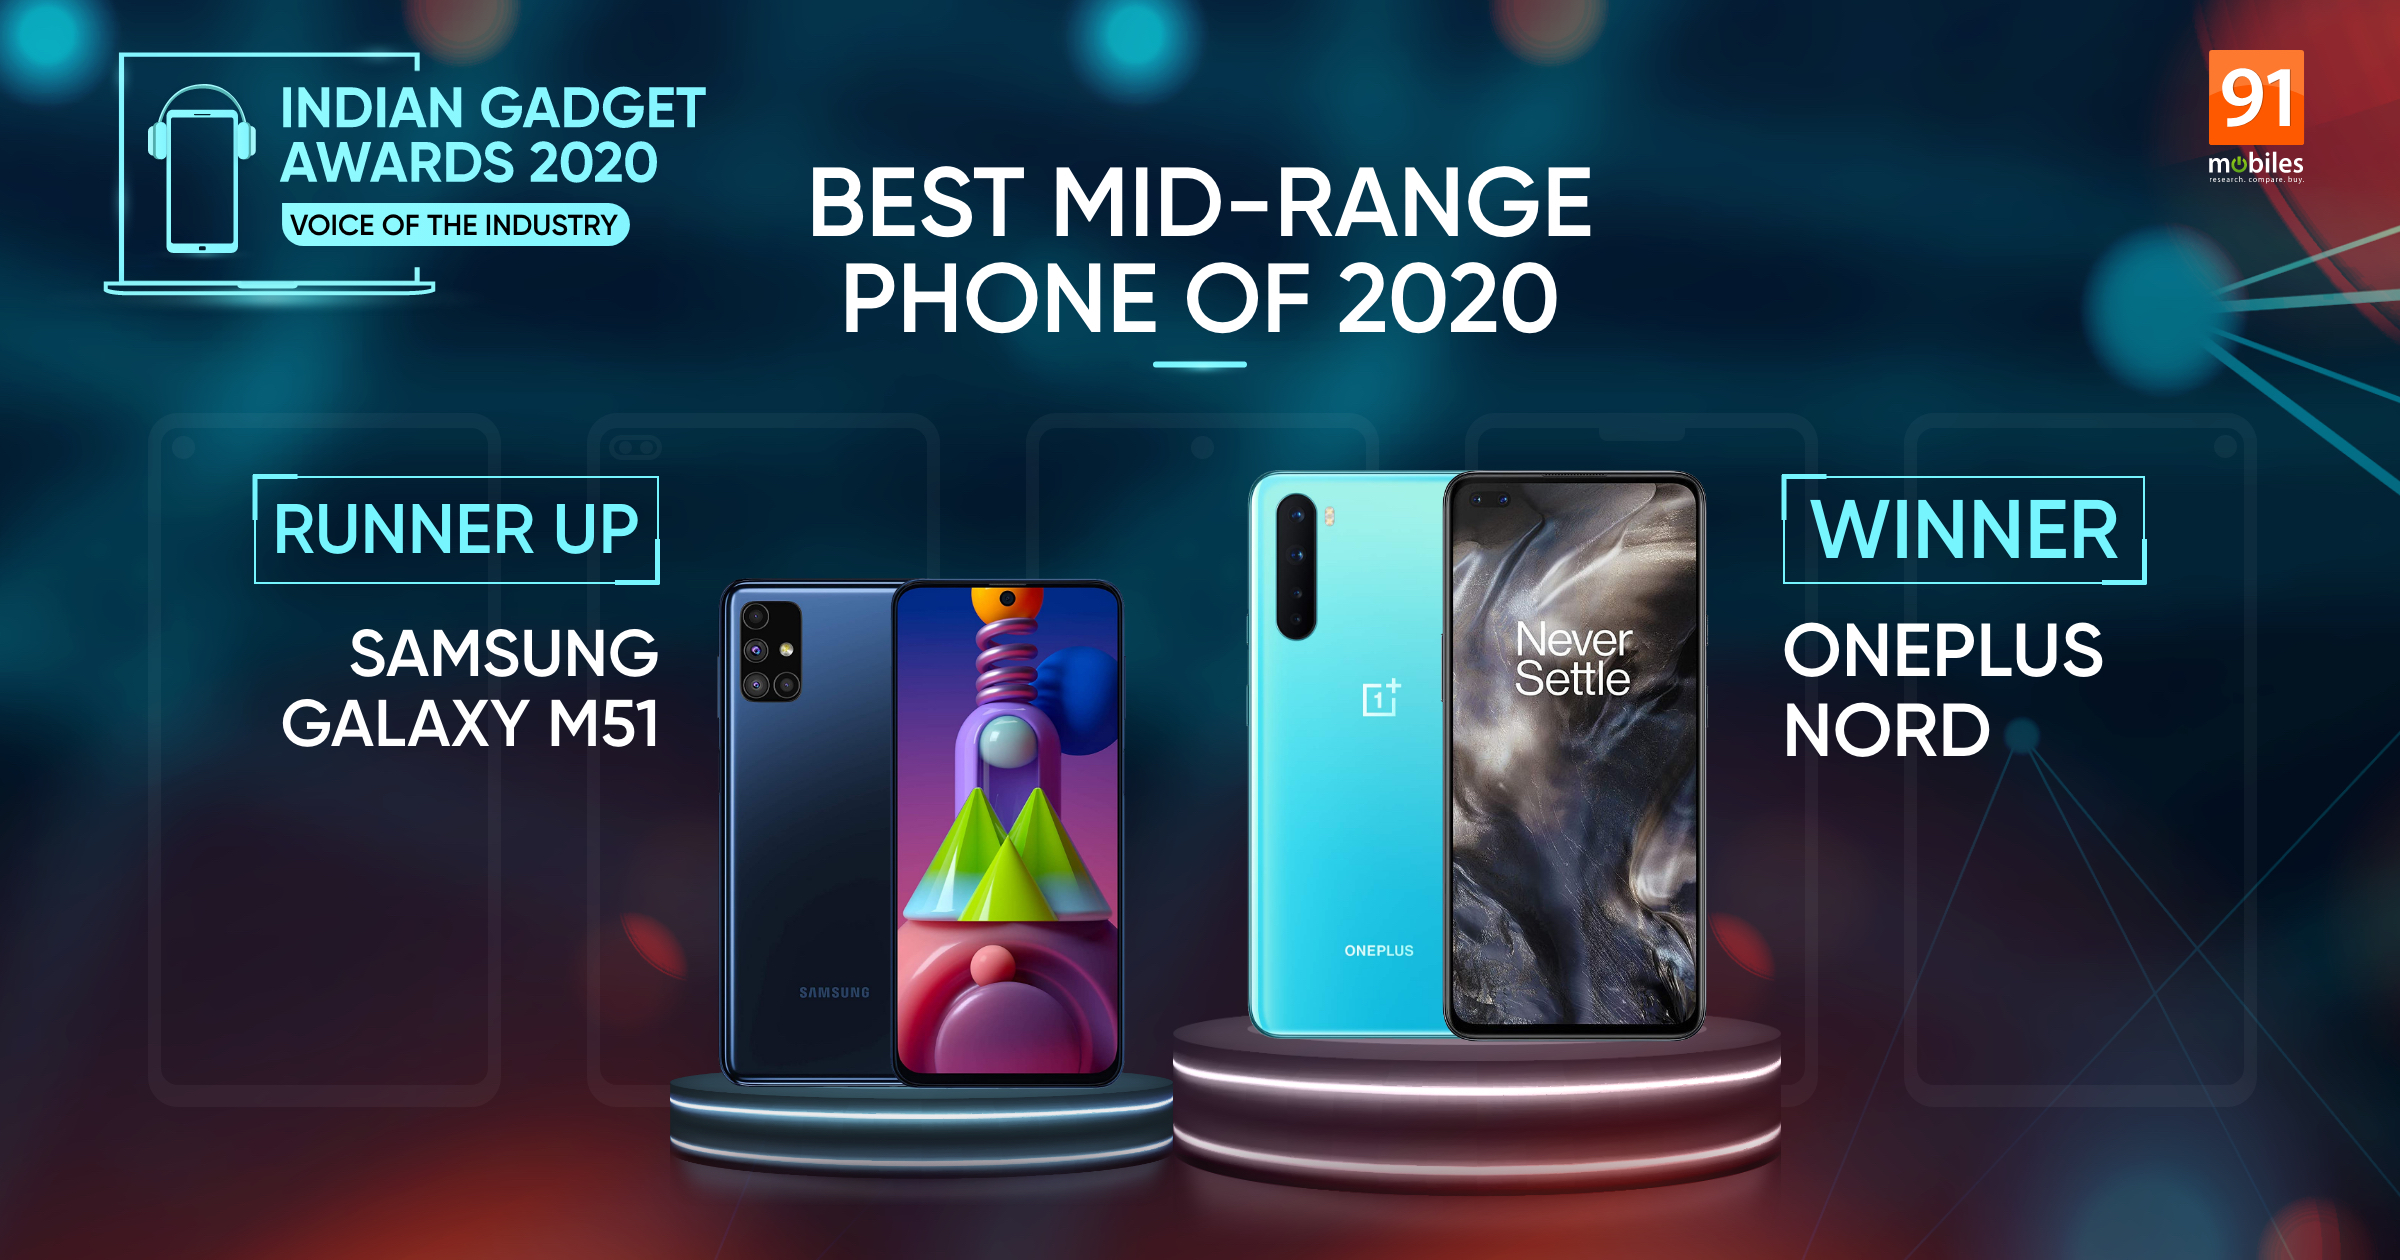 Indian Gadget Awards Will the title of Best Midrange Phone of 2020 go